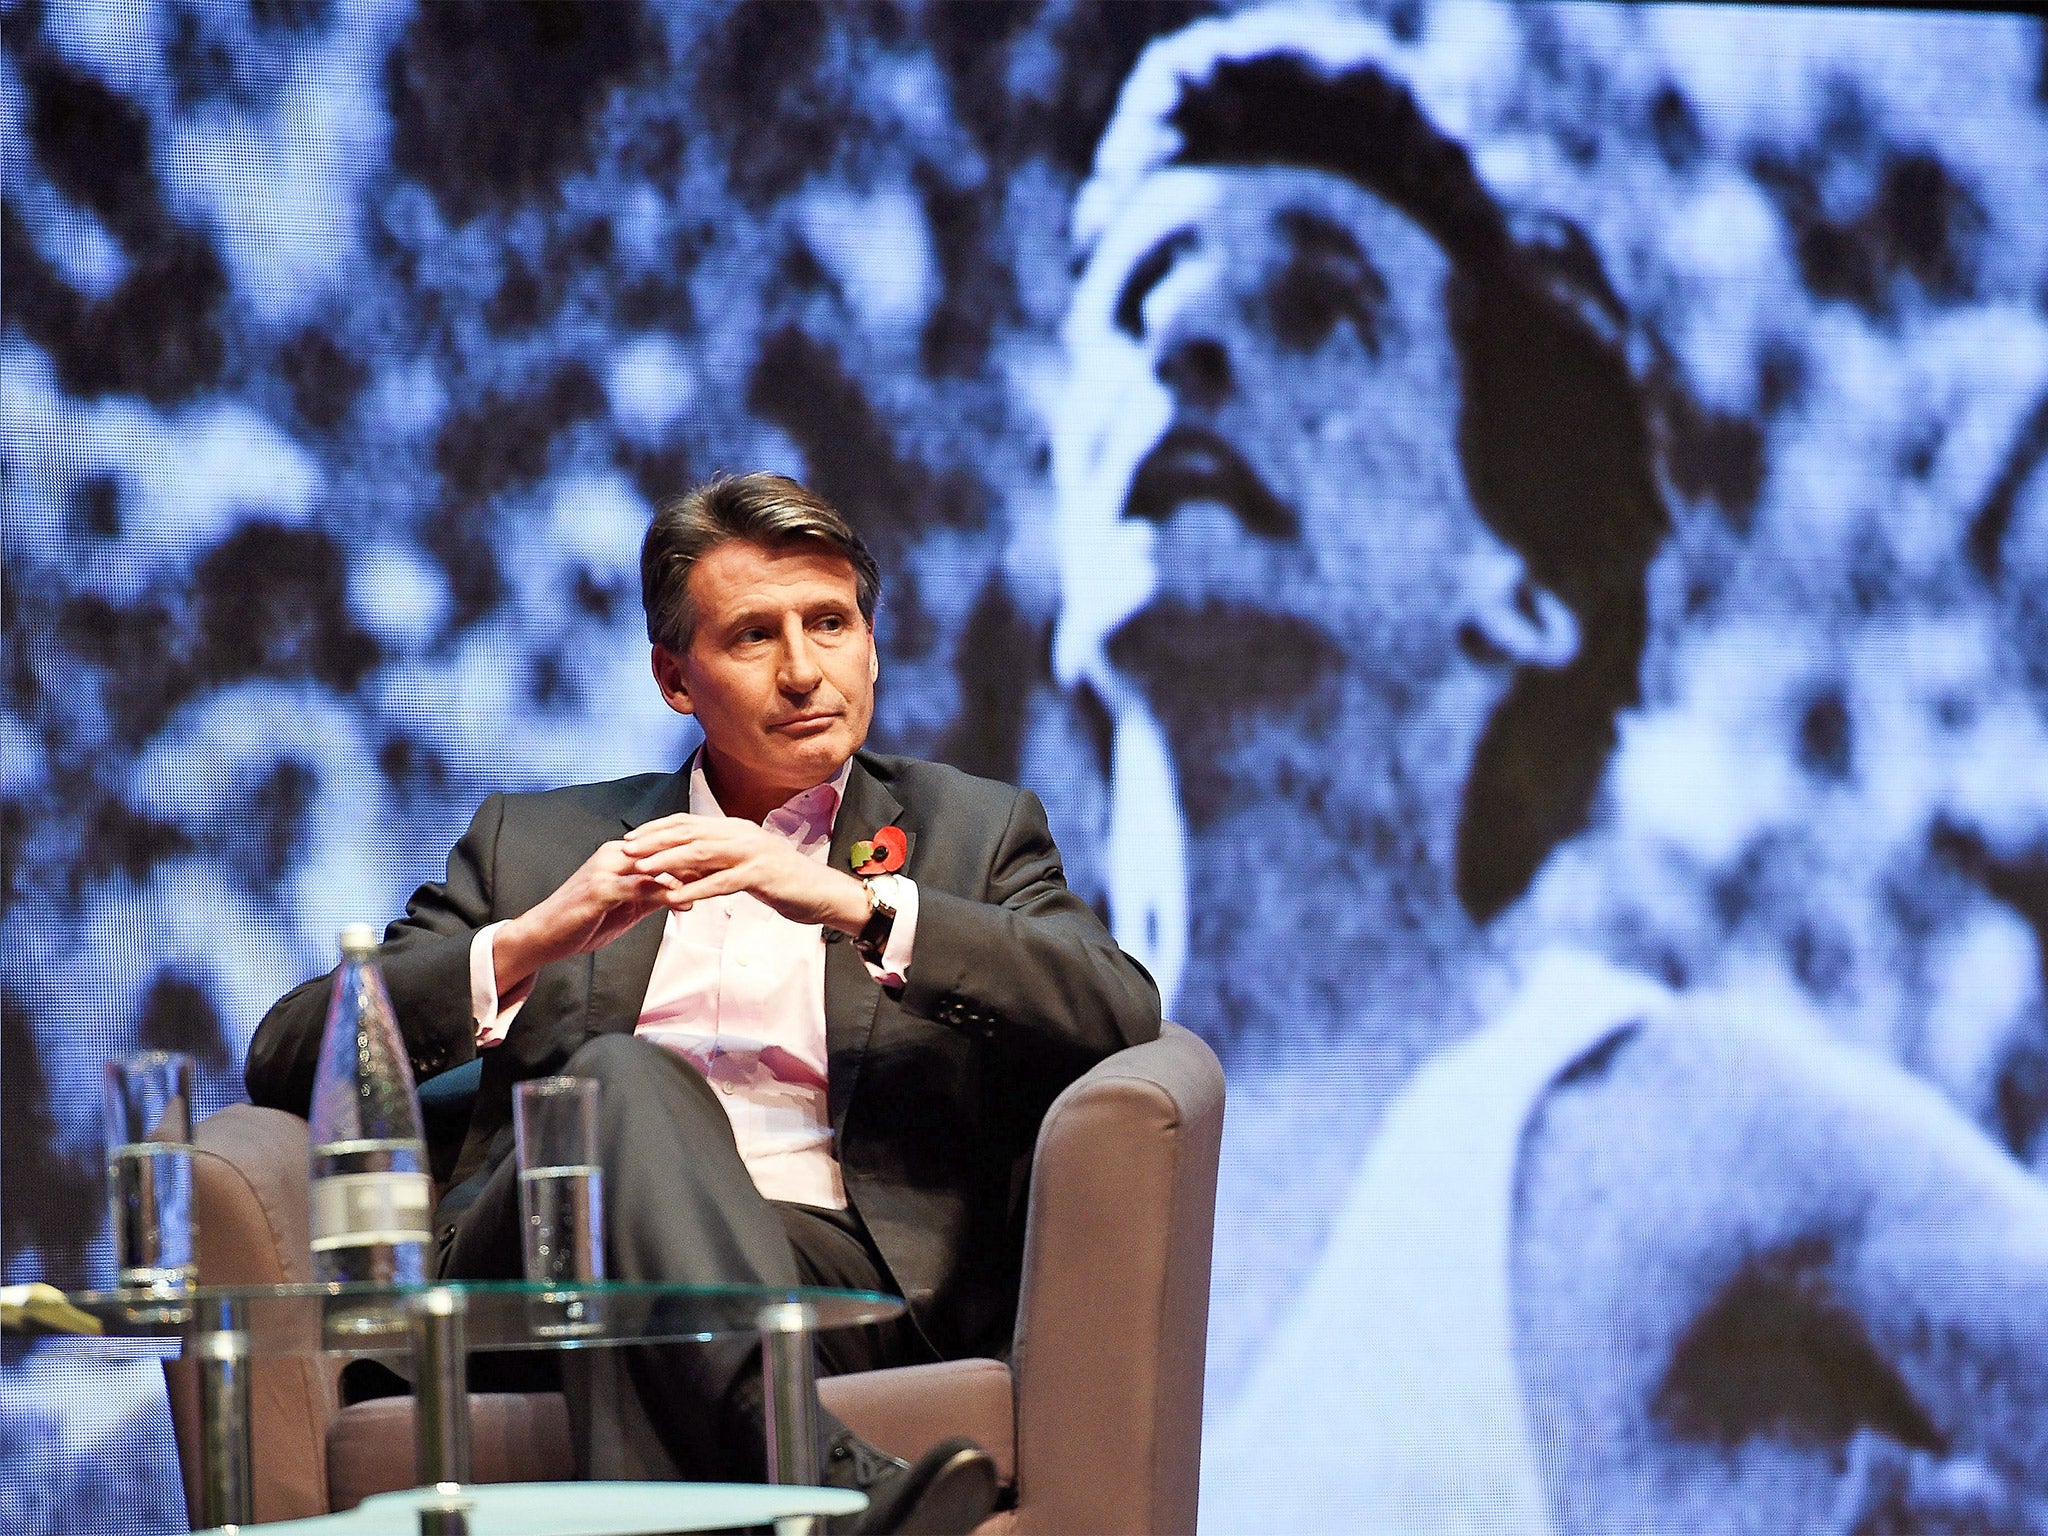 Lord Coe, the IAAF President, is expected to be questioned by MPs about the athletics doping scandal before Christmas